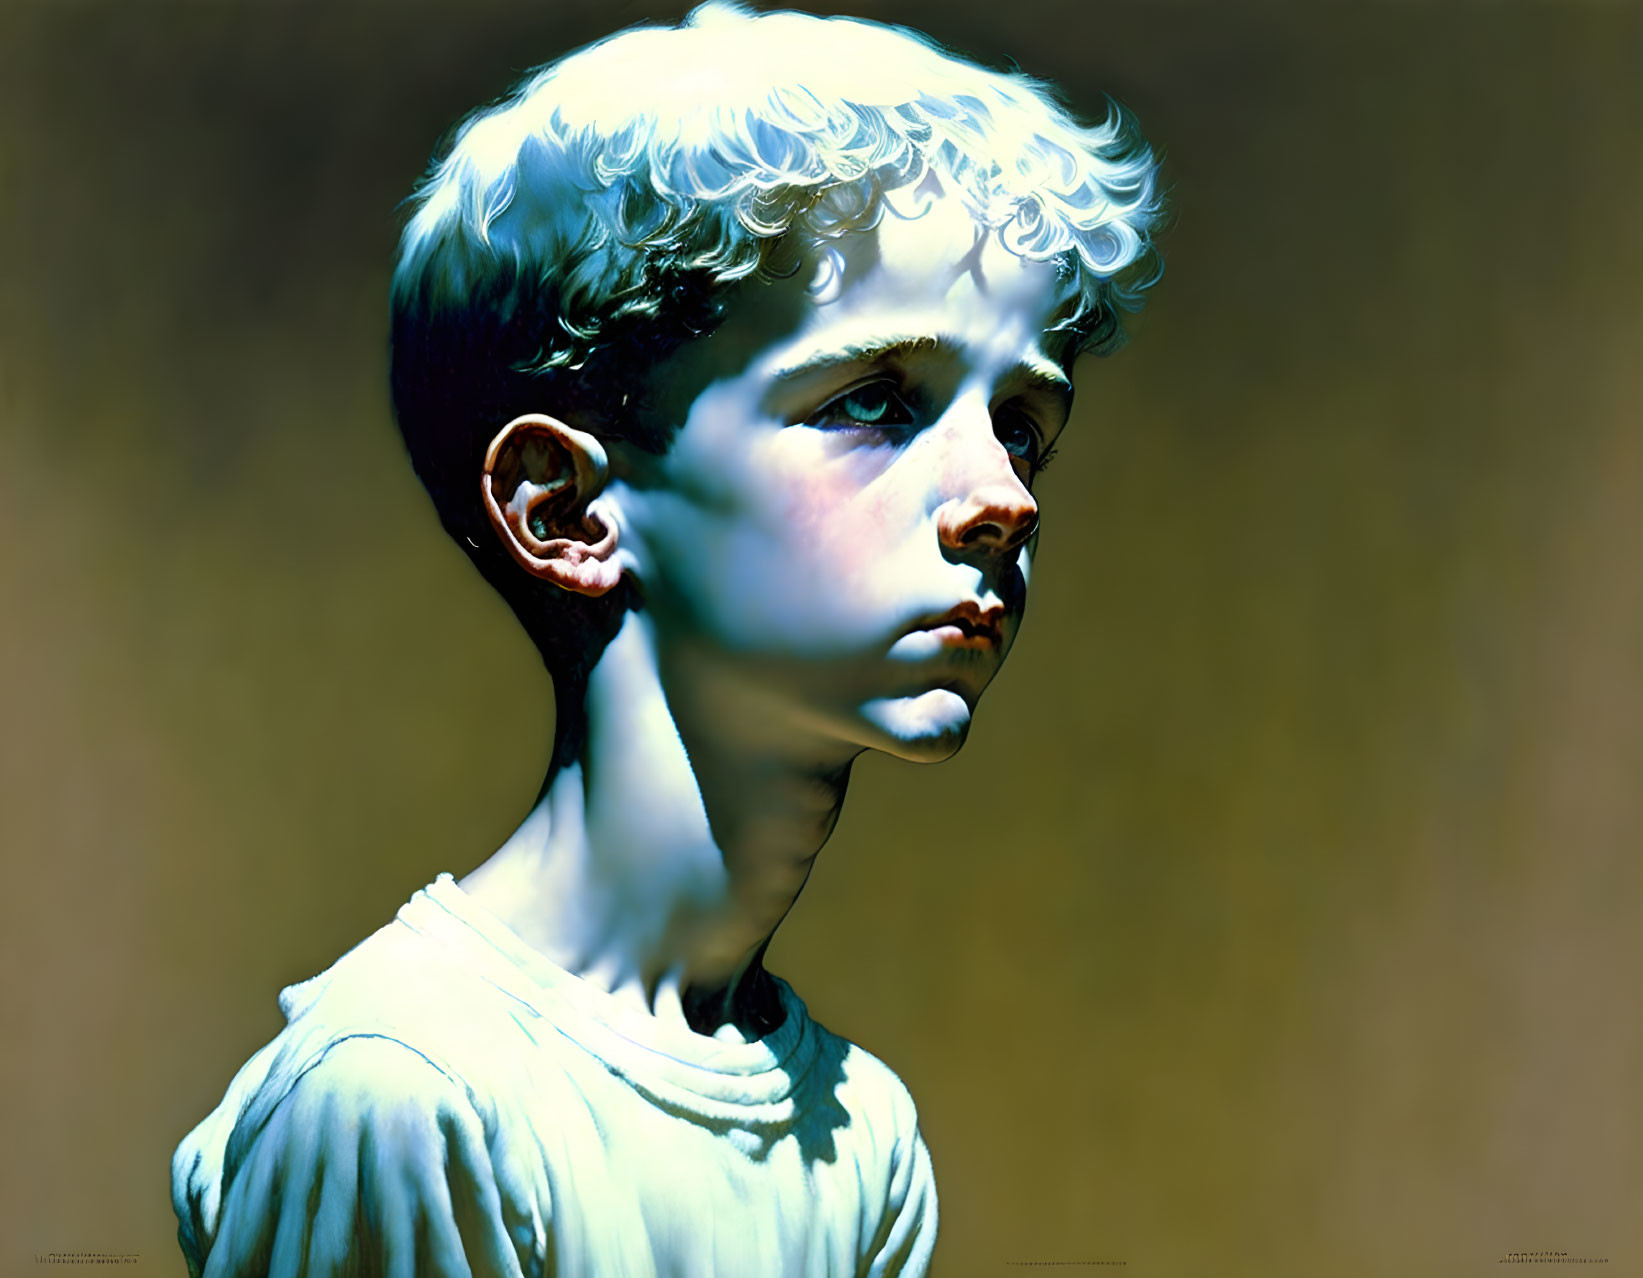 Young boy portrait with curly blond hair and contemplative expression on dark background